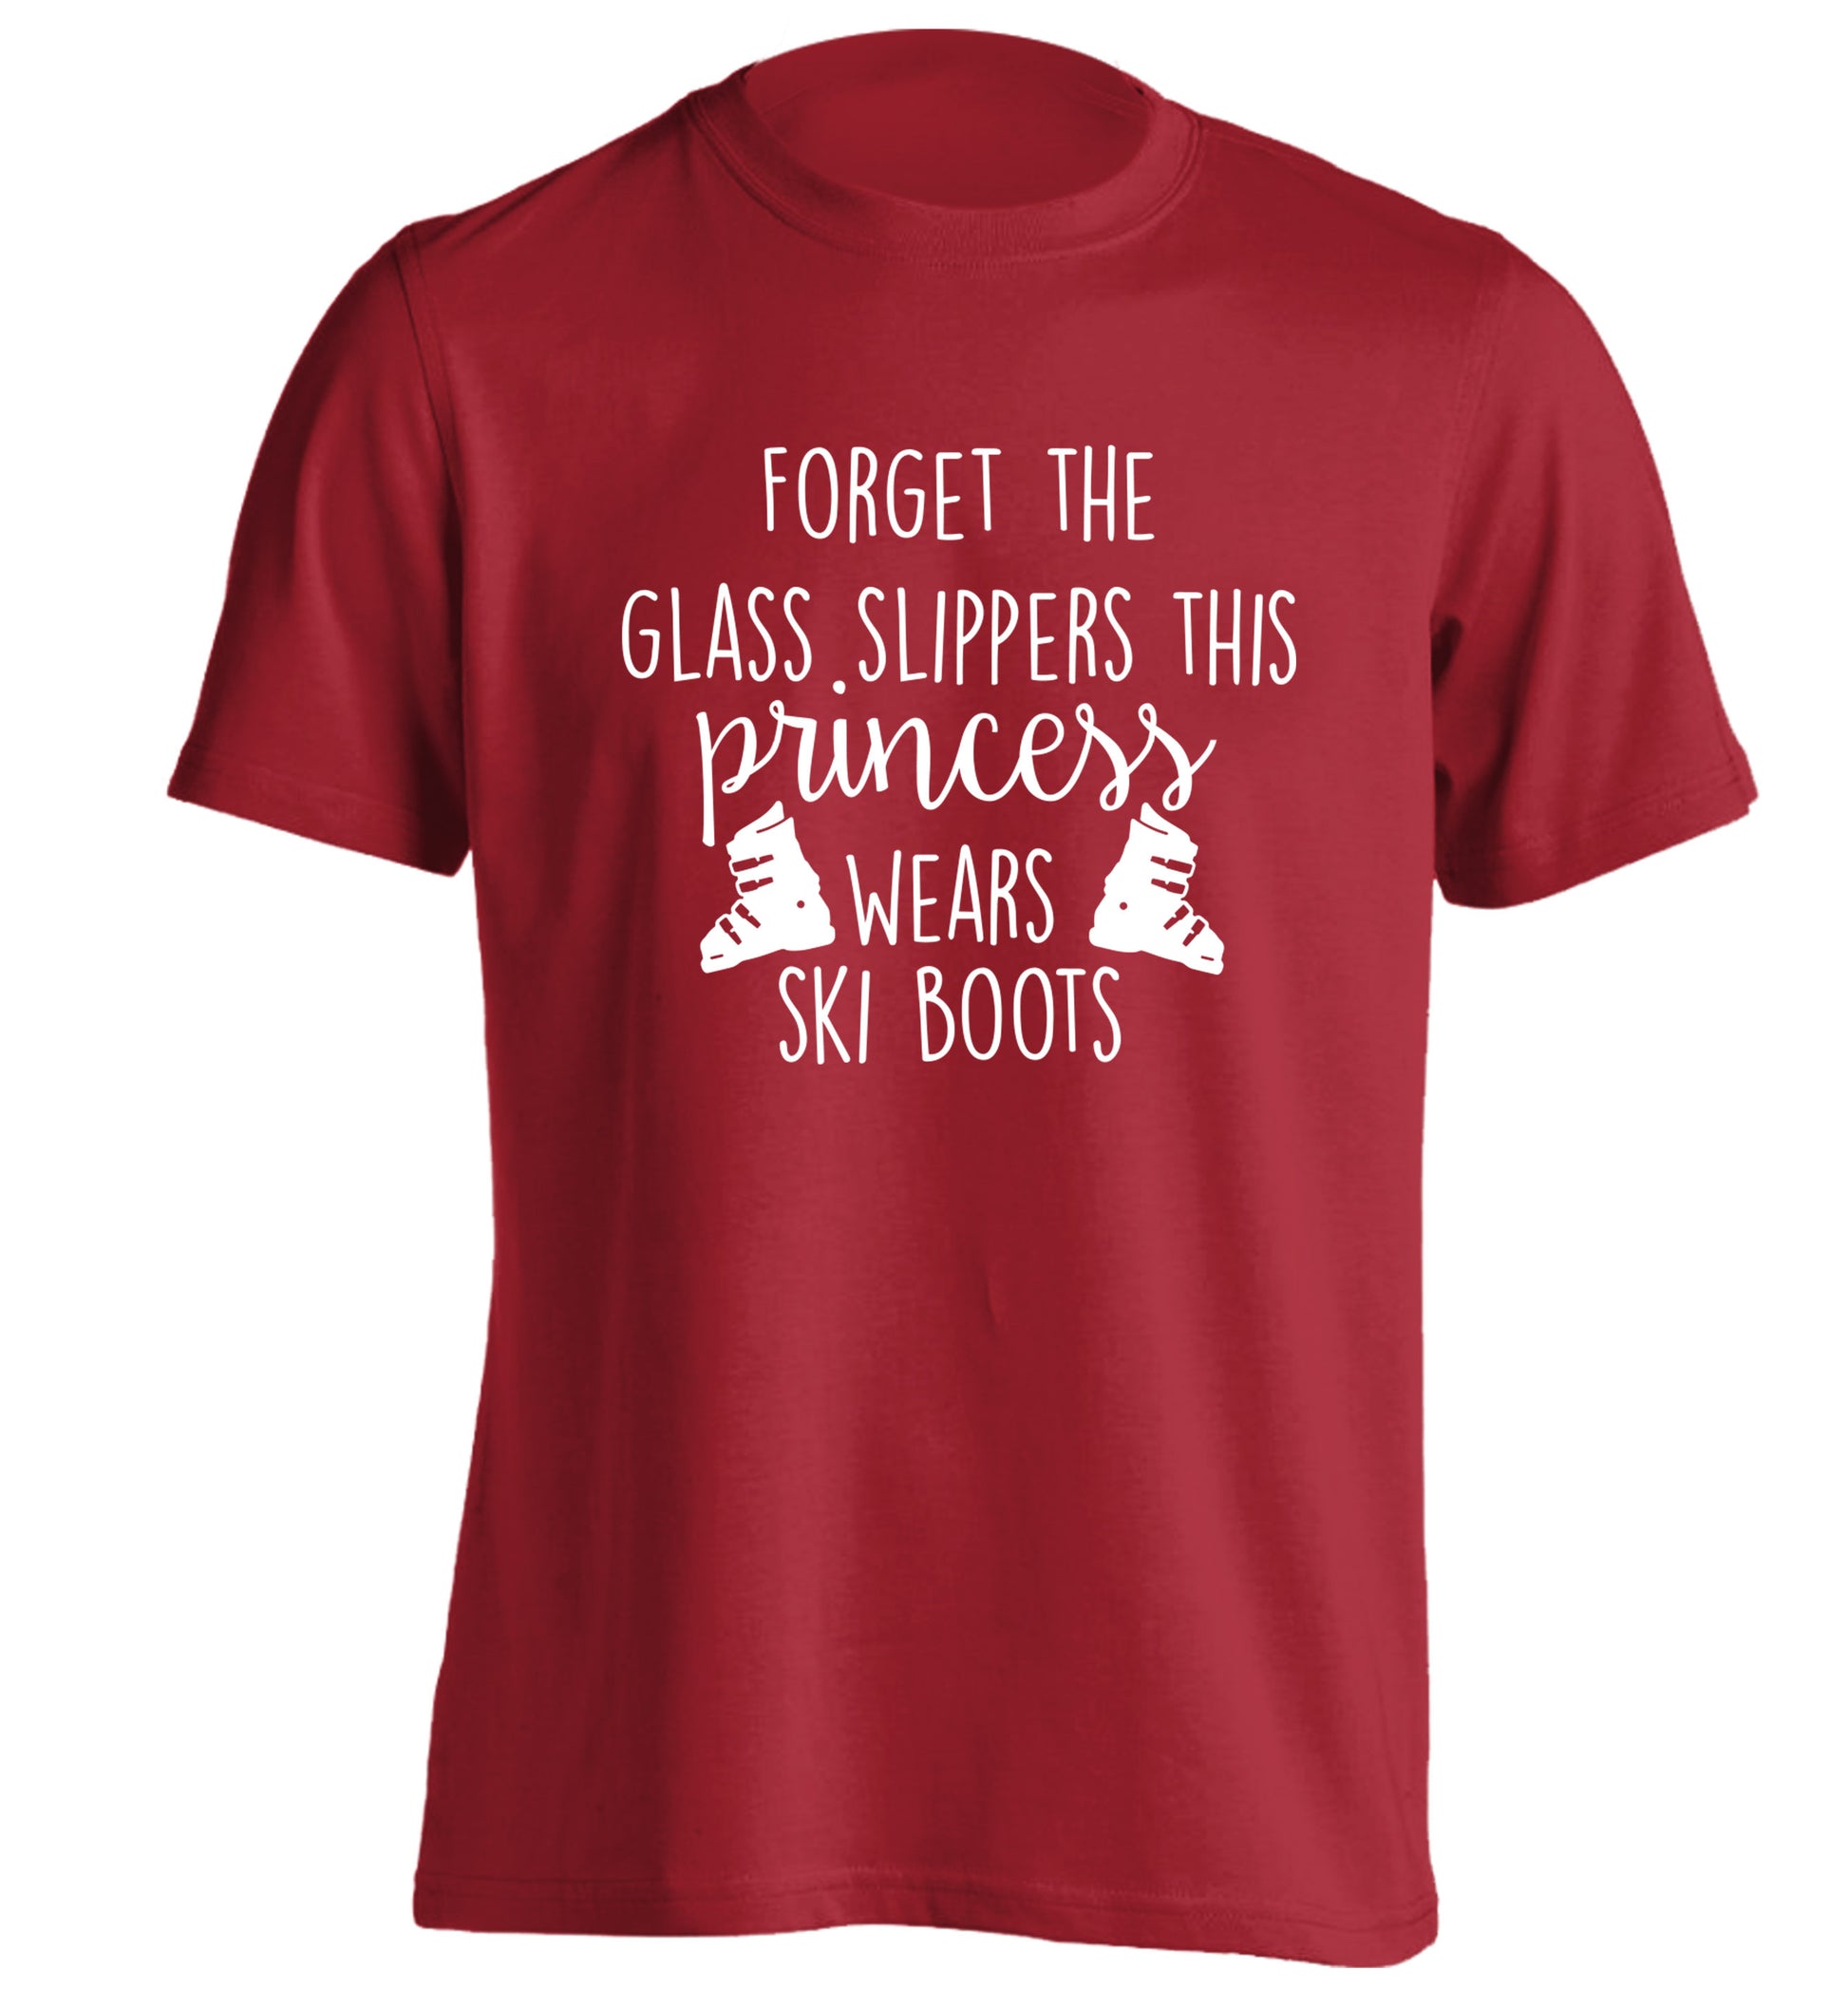 Forget the glass slippers this princess wears ski boots adults unisex red Tshirt 2XL